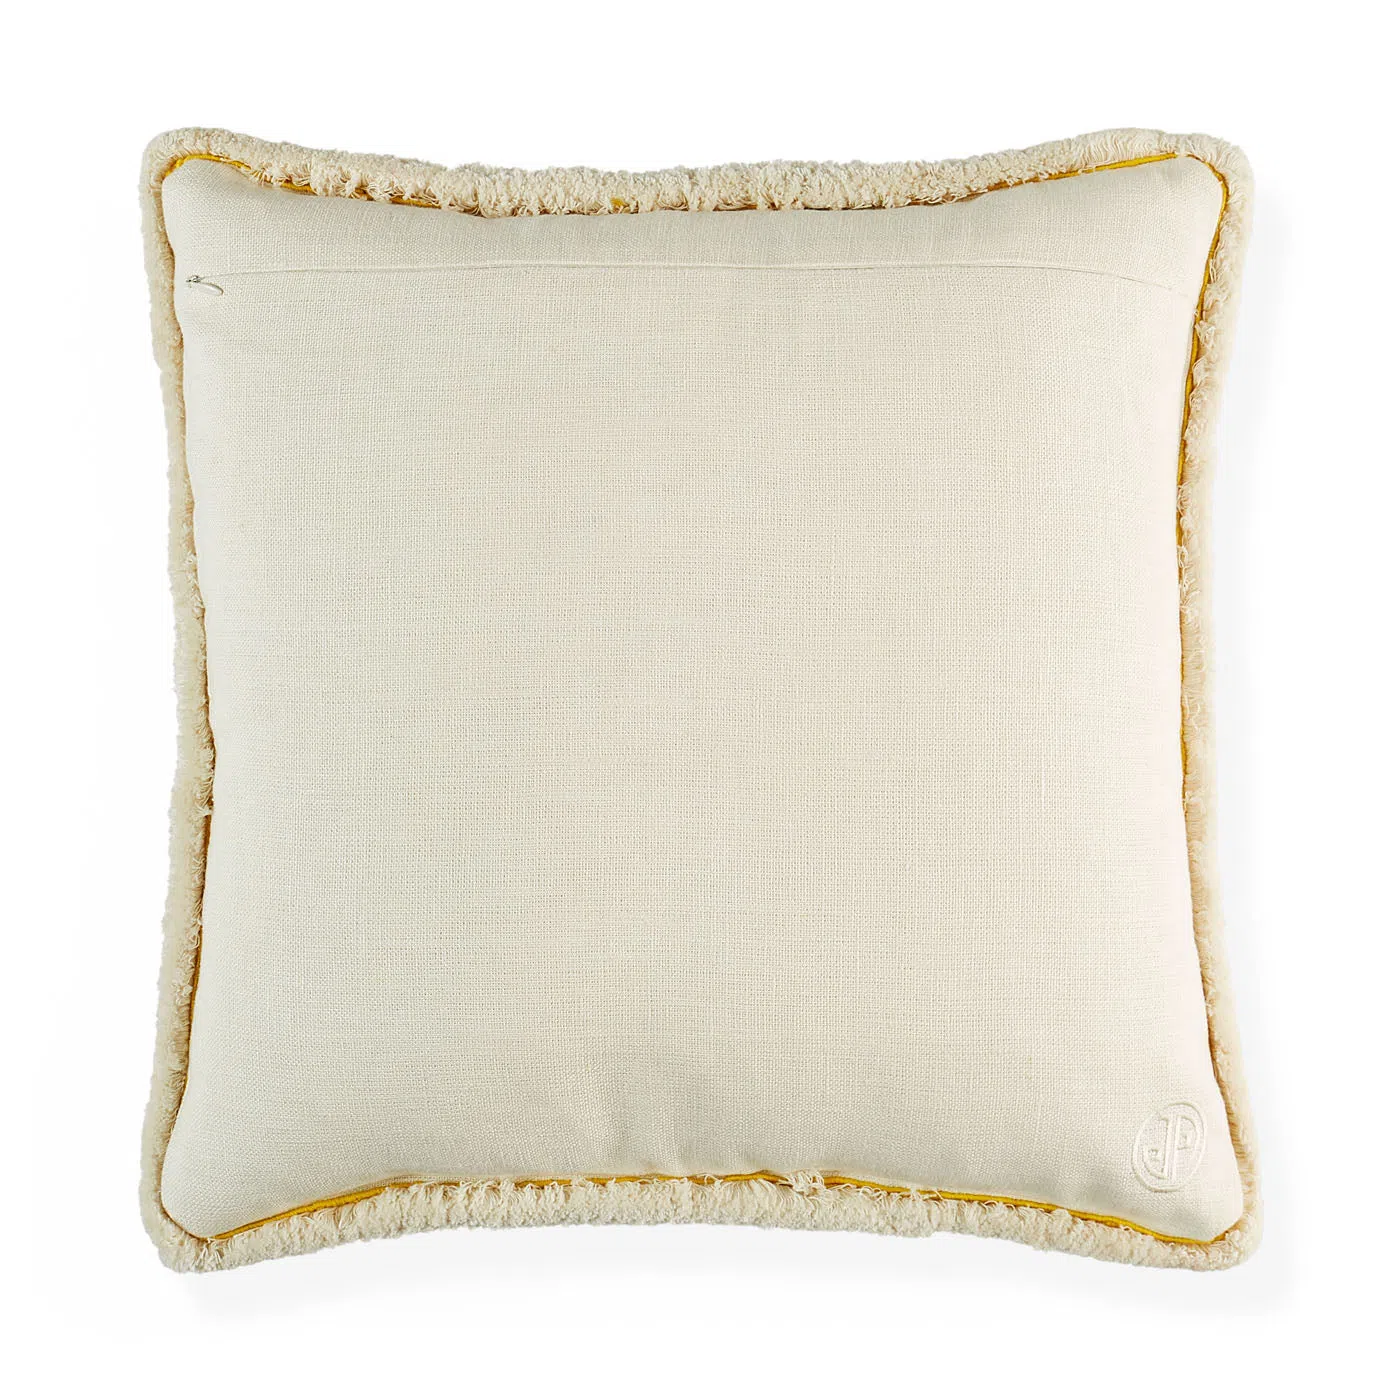 Scala Corded Square Pillow